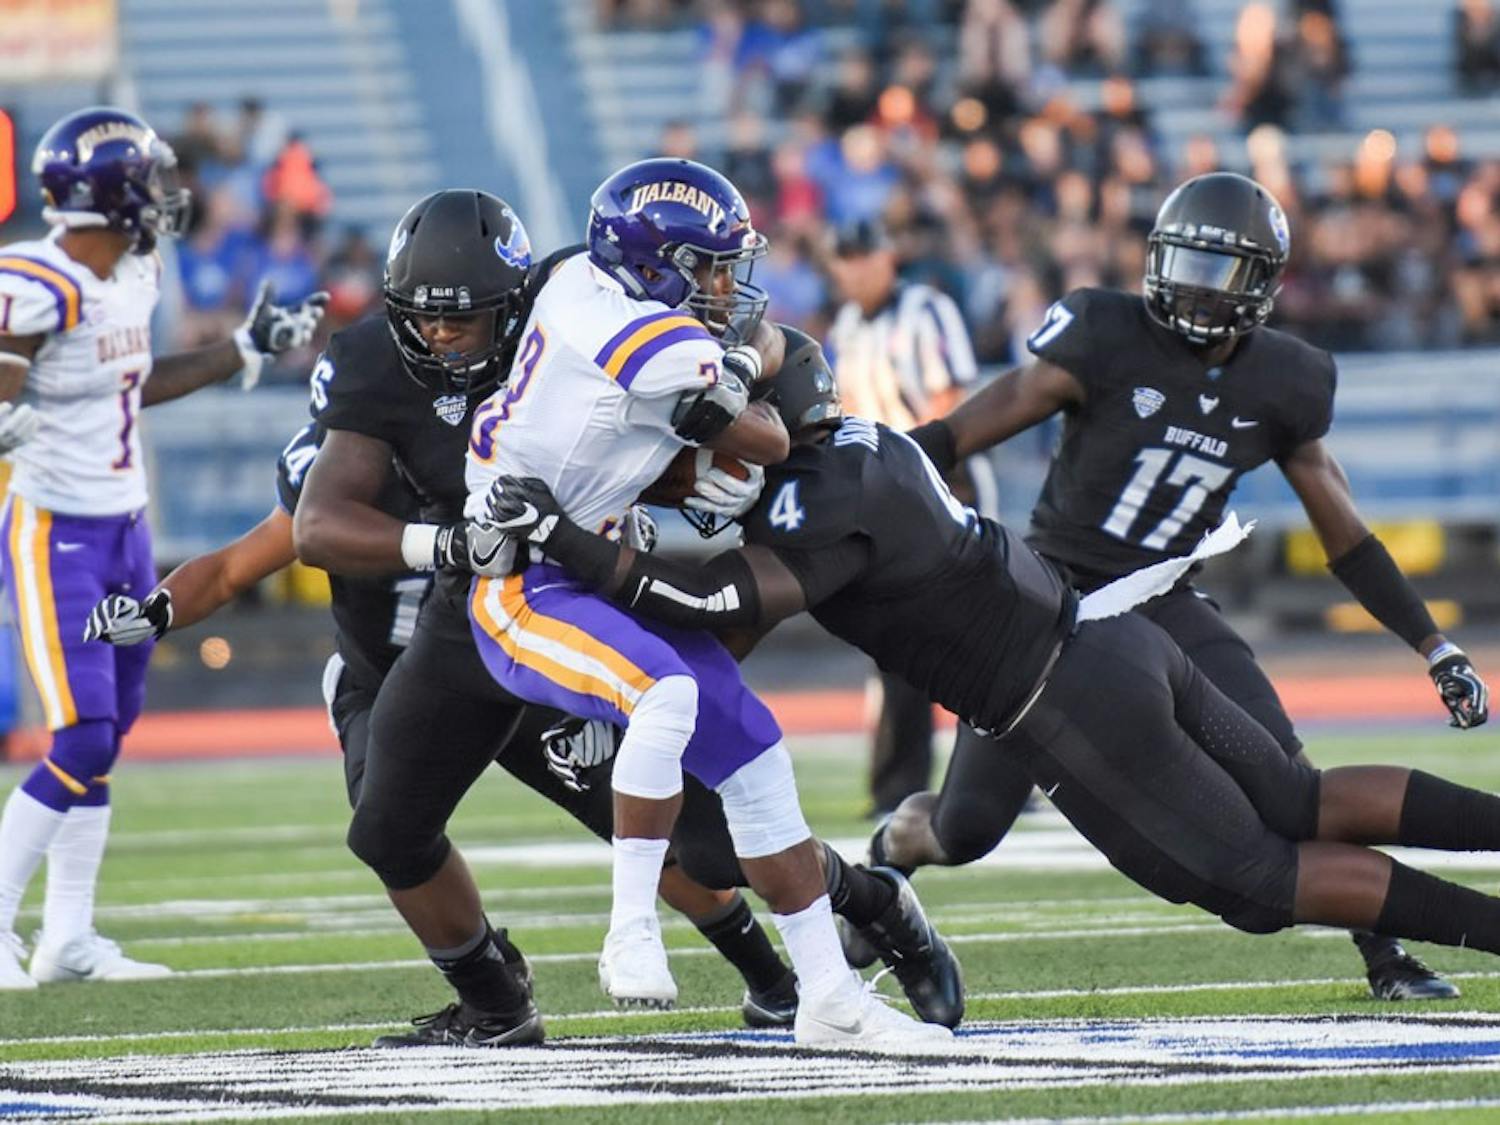 Sophomore linebacker Khalil Hodge tackles UAlbany player.&nbsp;Hodge, a&nbsp;JUCO transfer from California, already appears to be in full command as a leader on UB's&nbsp;defense.